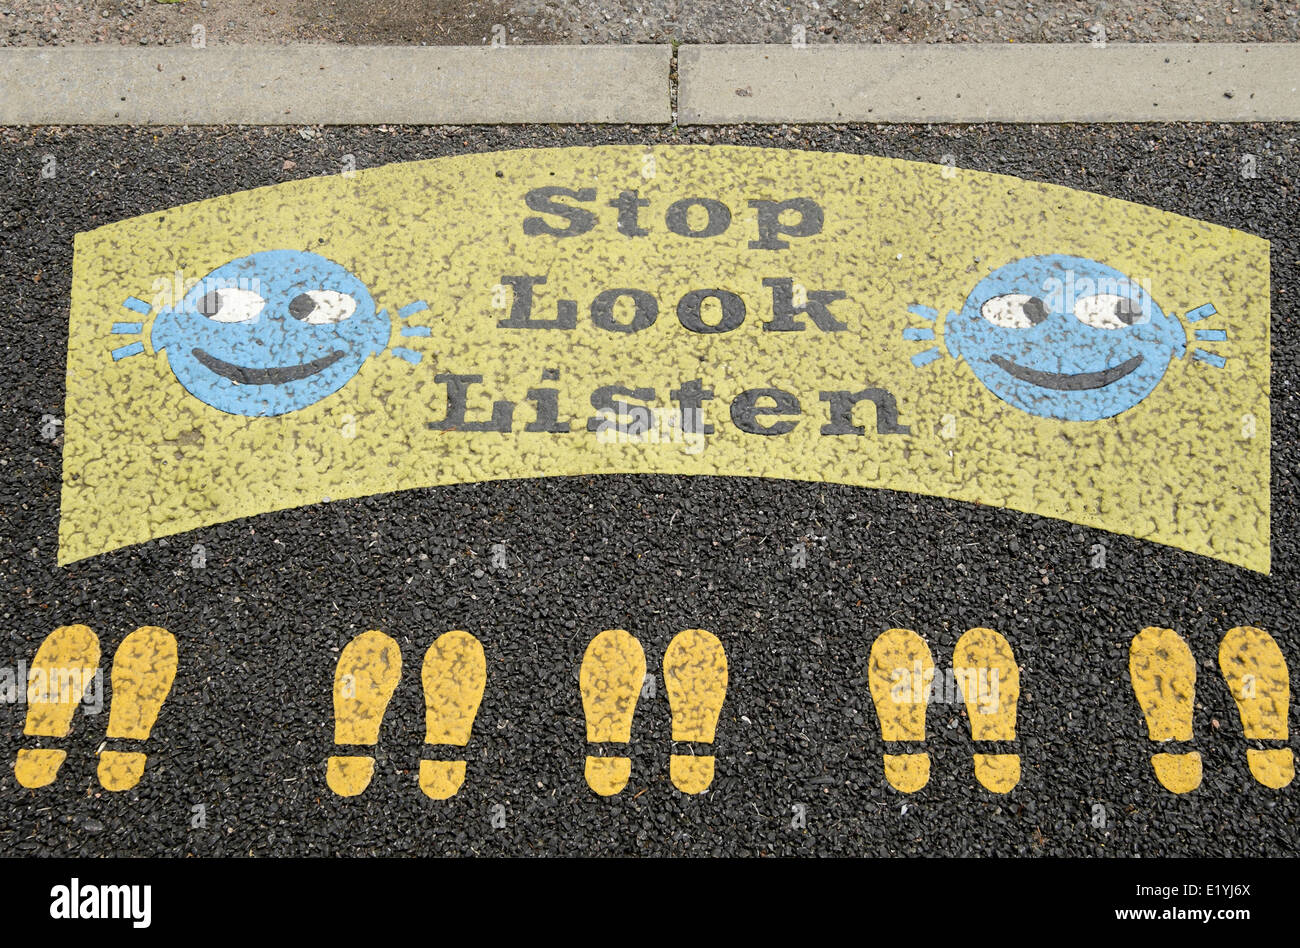 Stop Look Listen sign with smiley faces and footprints painted on a roadside kerb near a primary school road crossing from above. UK Britain Stock Photo